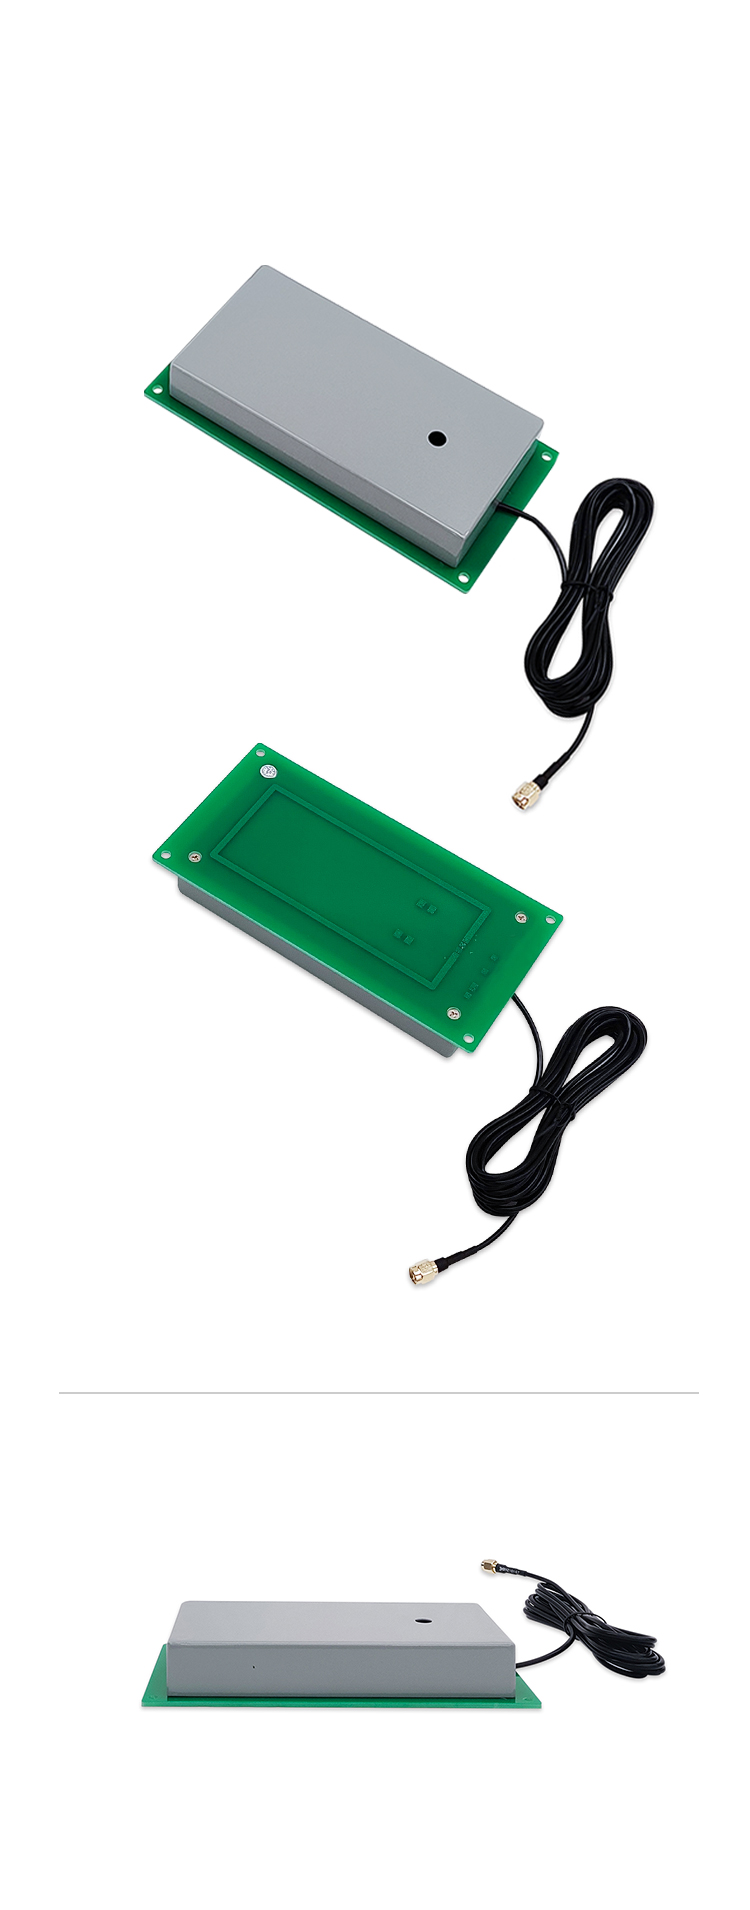 Embedded RFID Reader And Antenna For RFID Security System PCB And Metal Plate Material